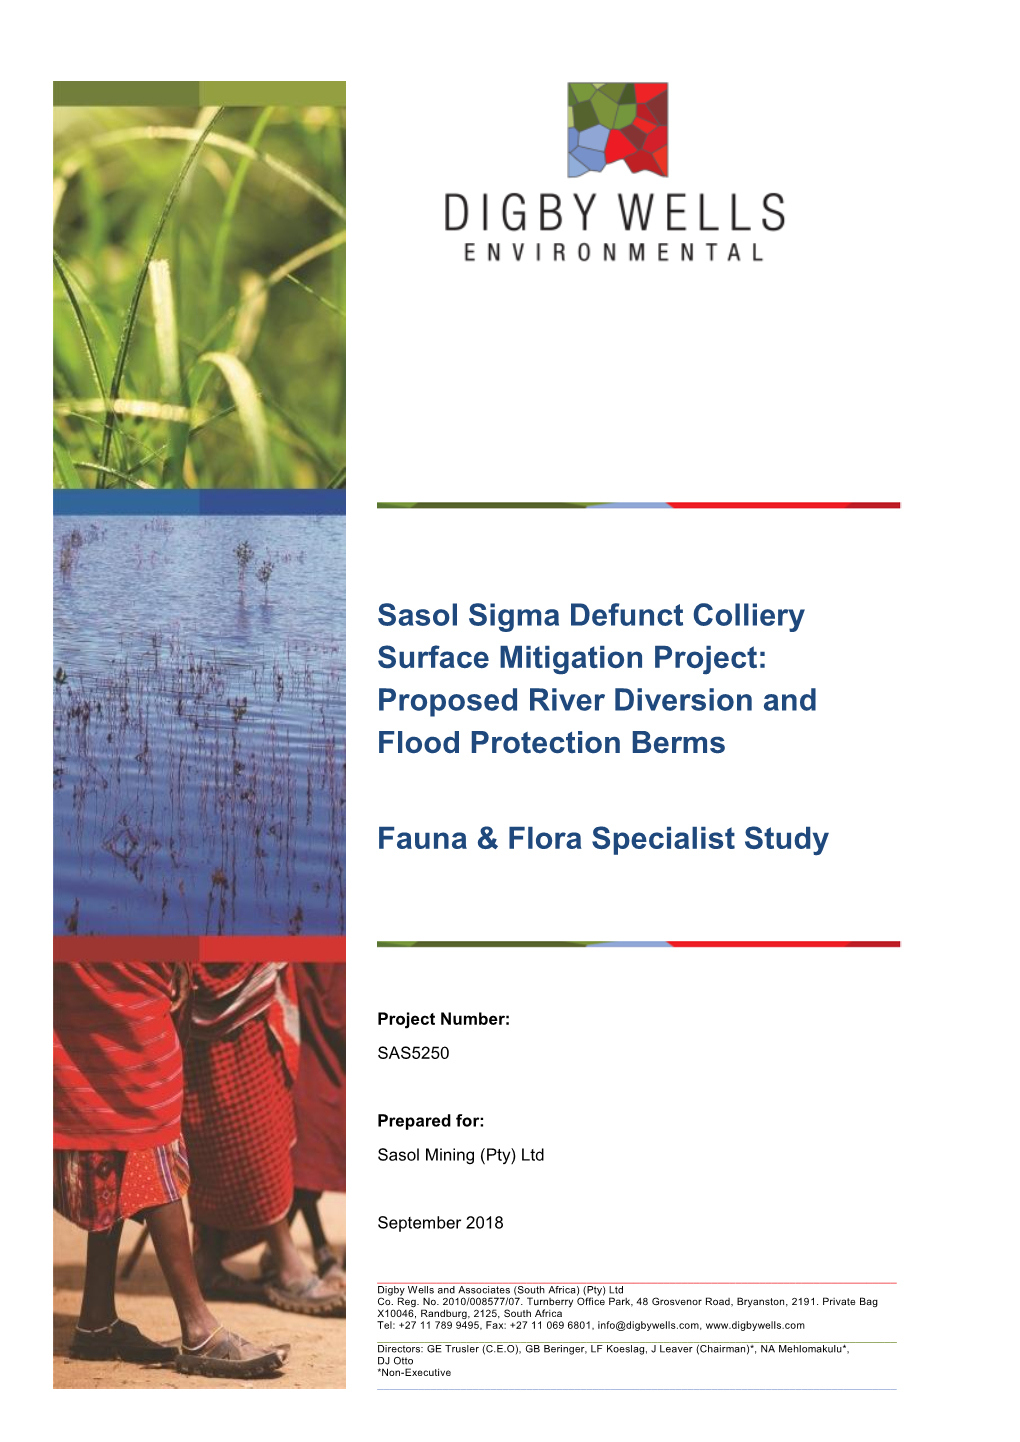 Sasol Sigma Defunct Colliery Surface Mitigation Project: Proposed River Diversion and Flood Protection Berms